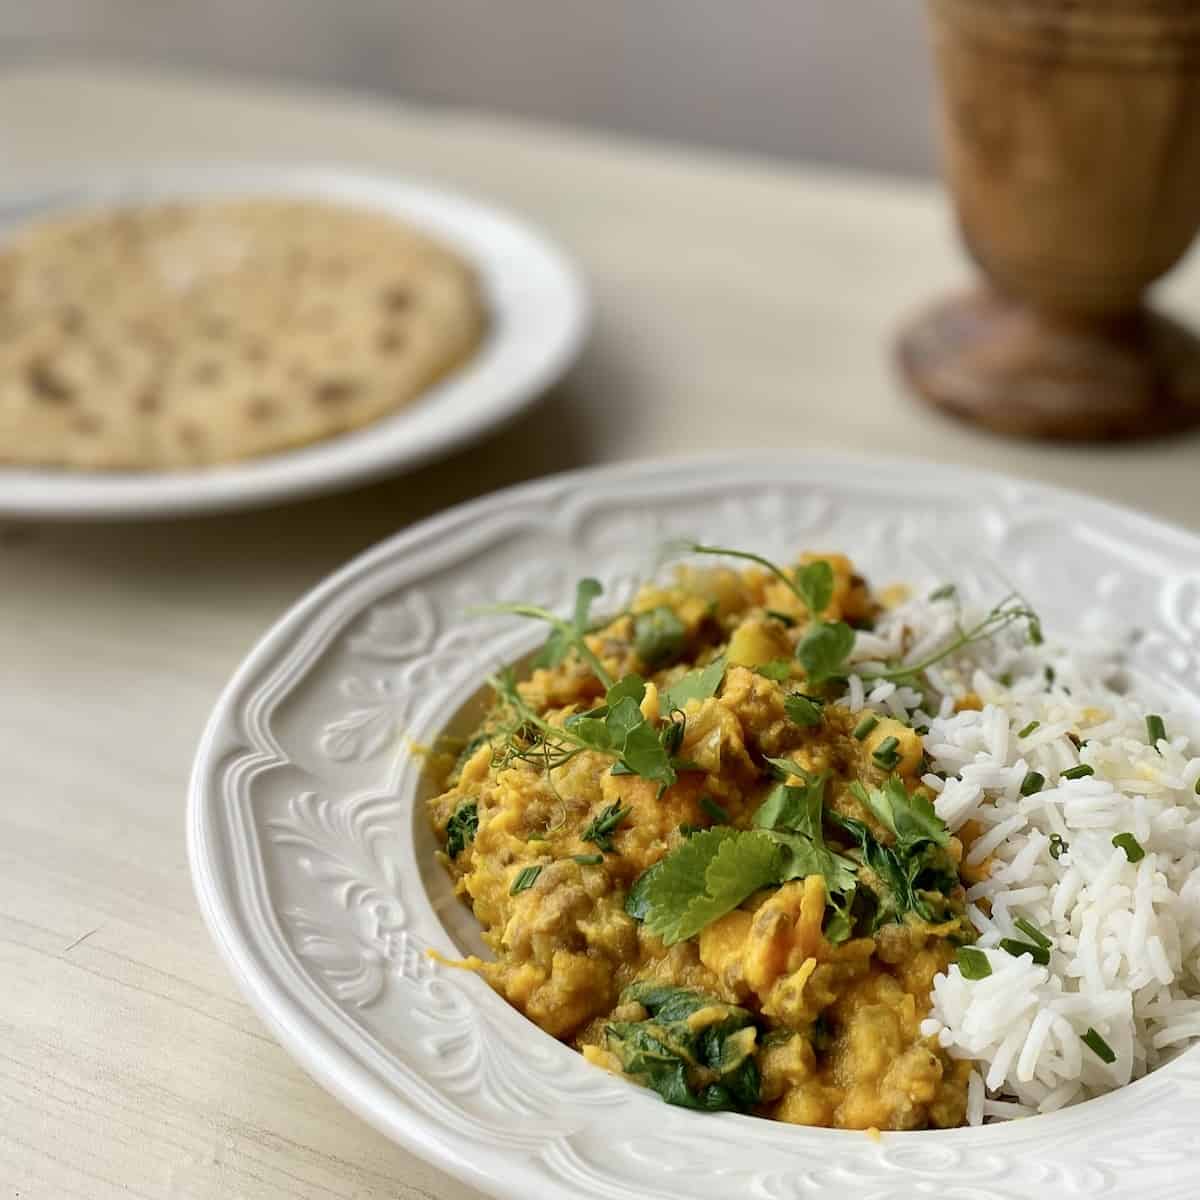 West African peanut stew with rice